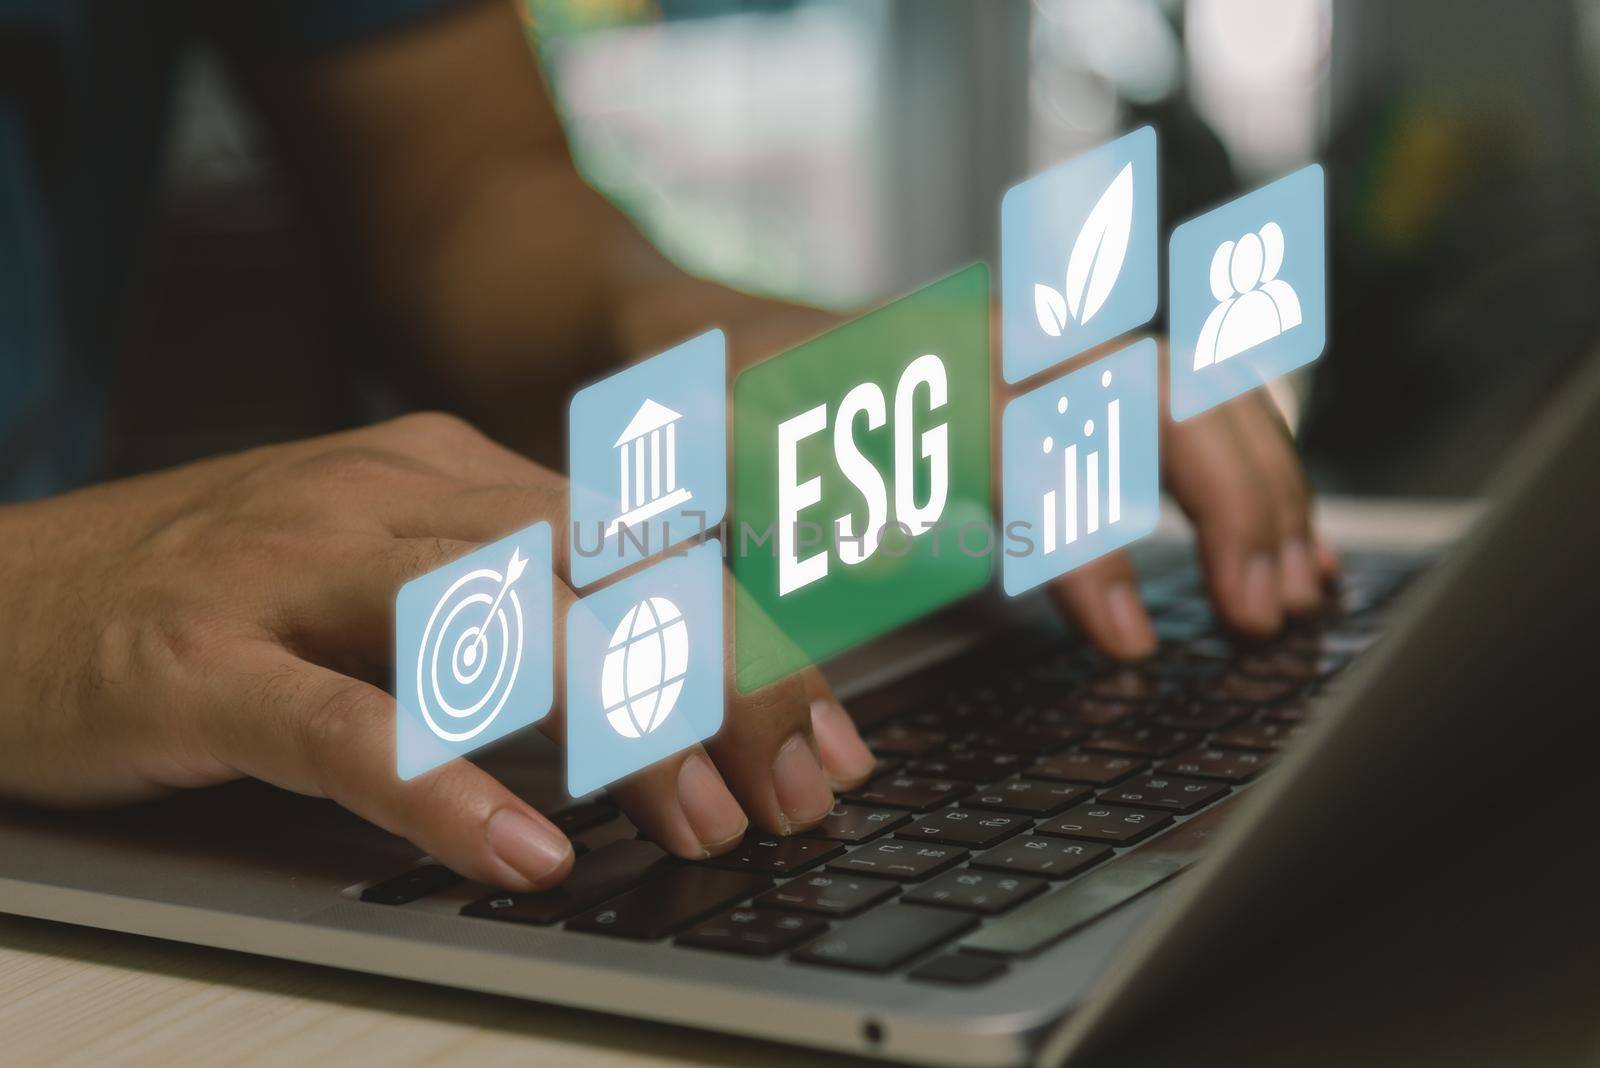 ESG environment social governance investment business concept. hand using computer laptop icon symbol of esg on virtual screen concept. business investment strategy concept.